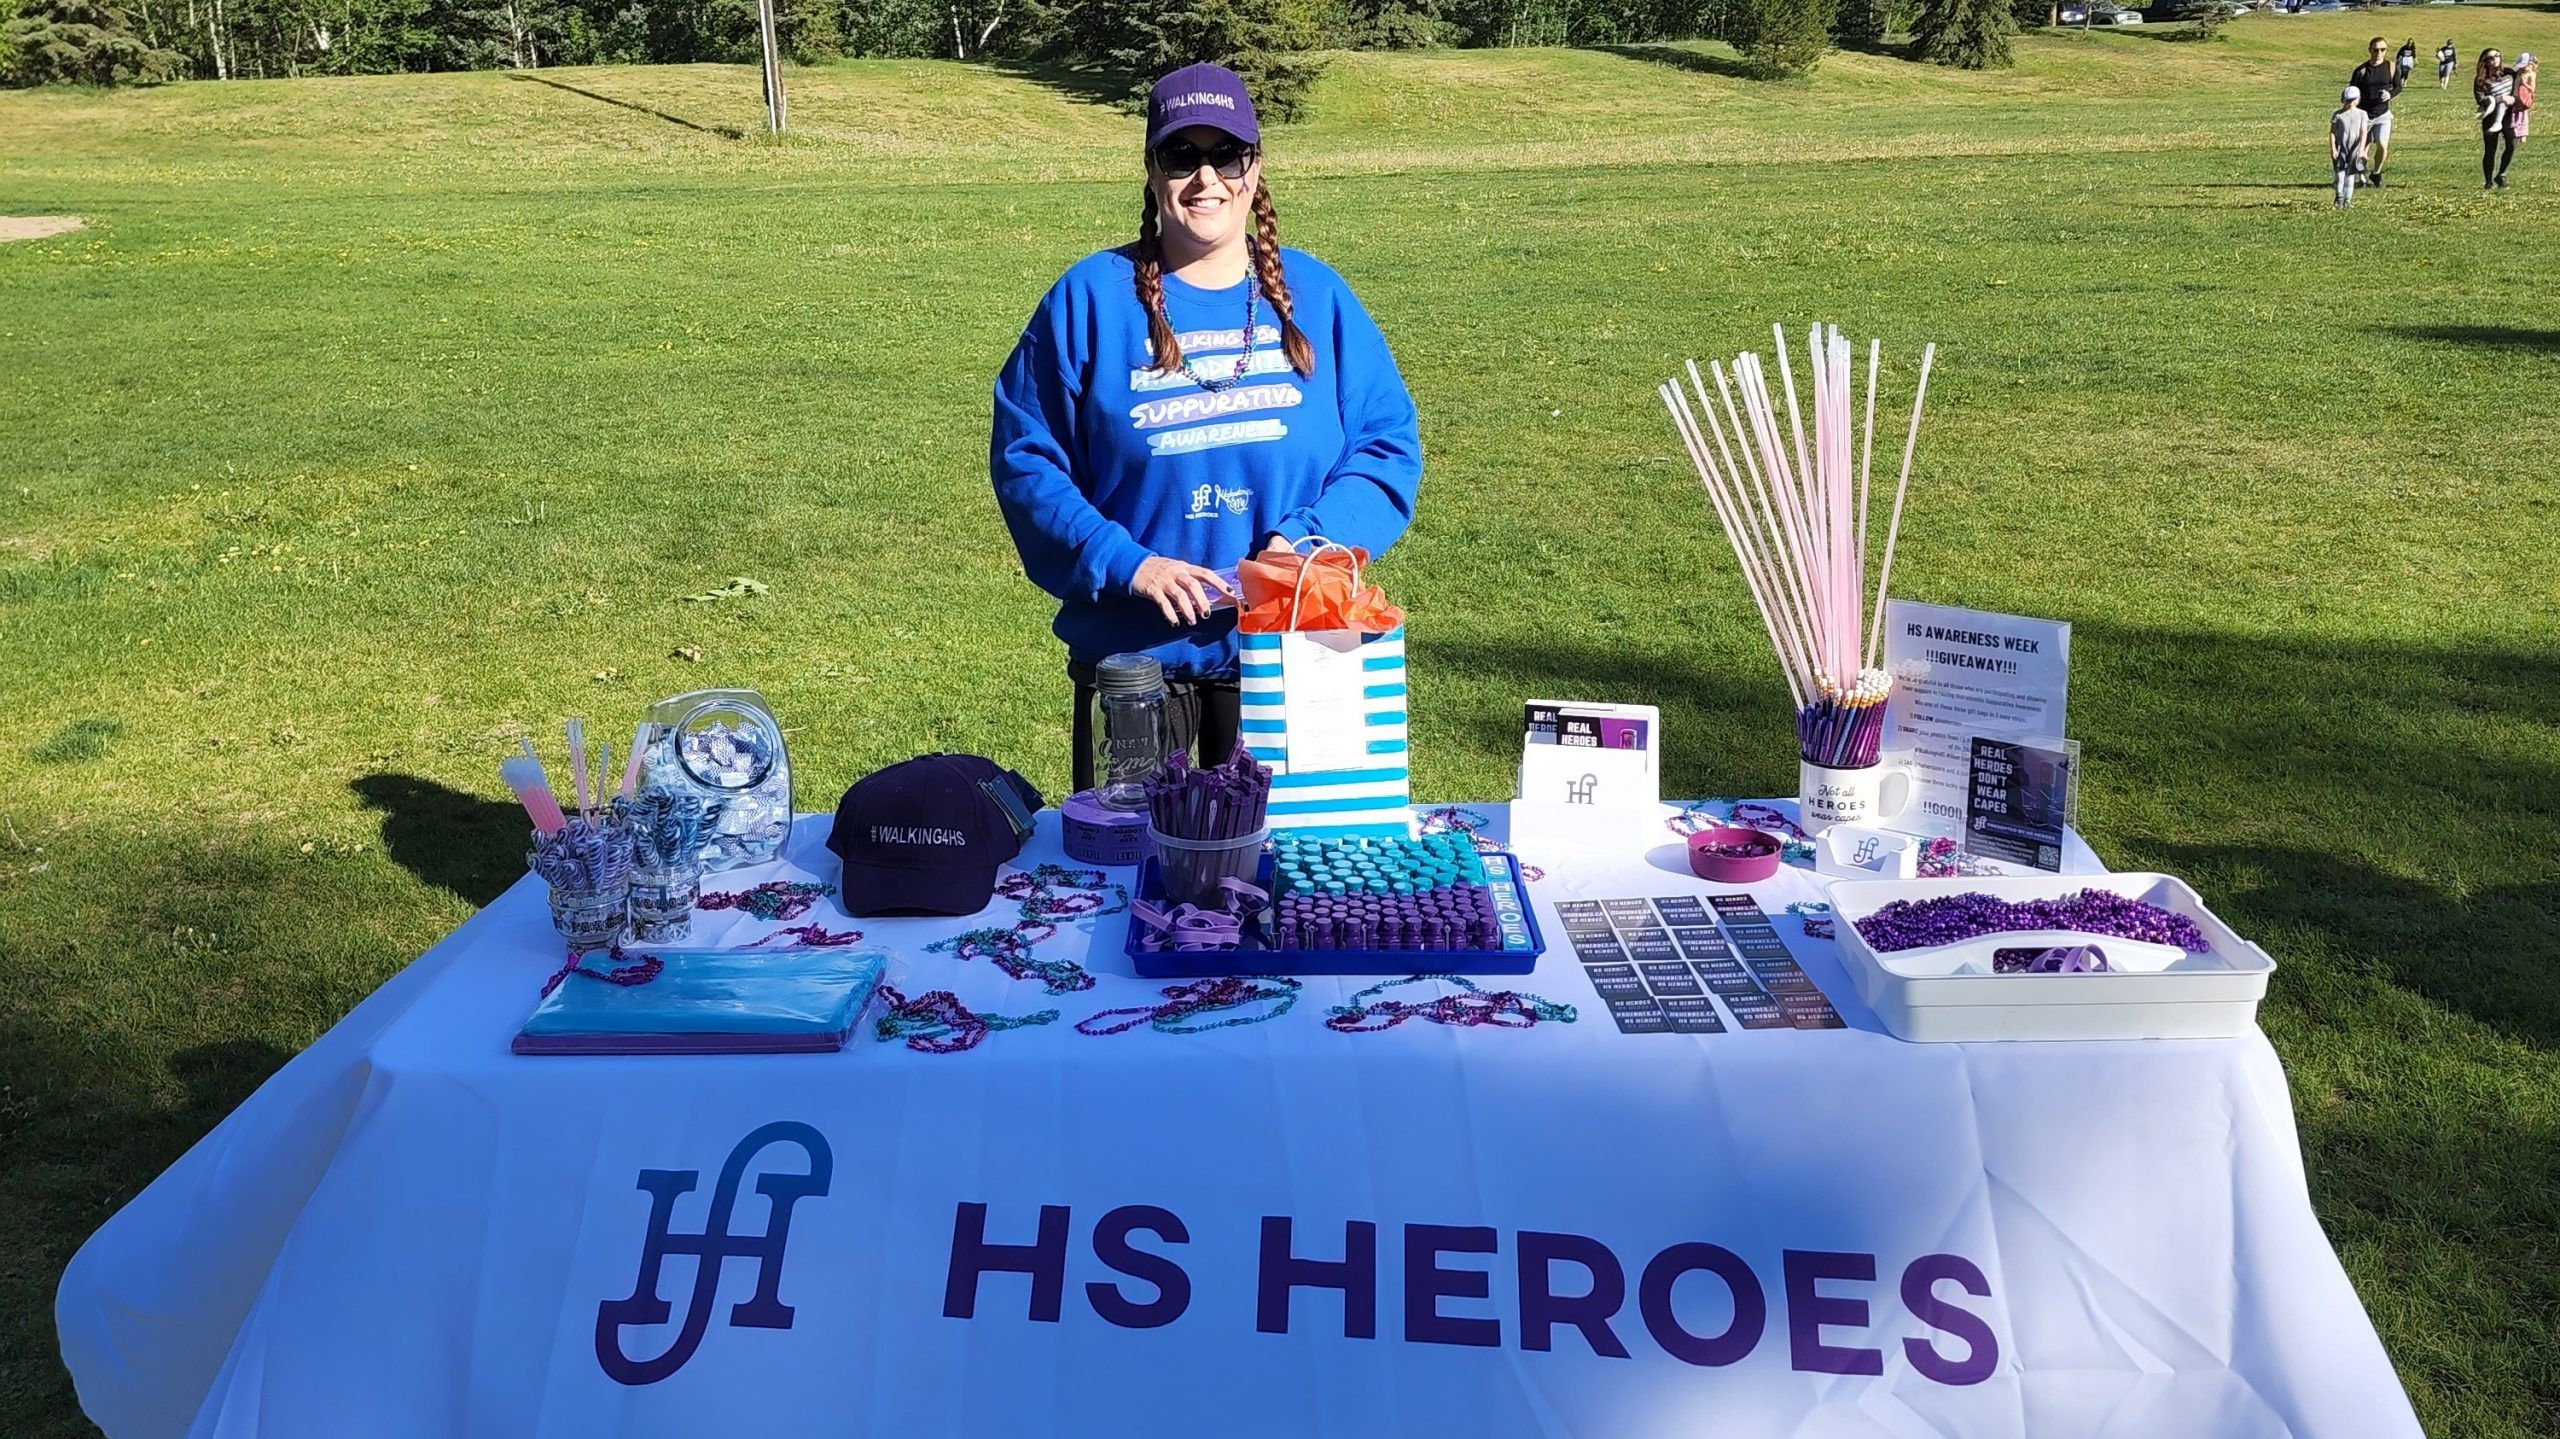 Krystle Sutherland co-founded HS Heroes to raise awareness of Hidradenitis Suppurativa.